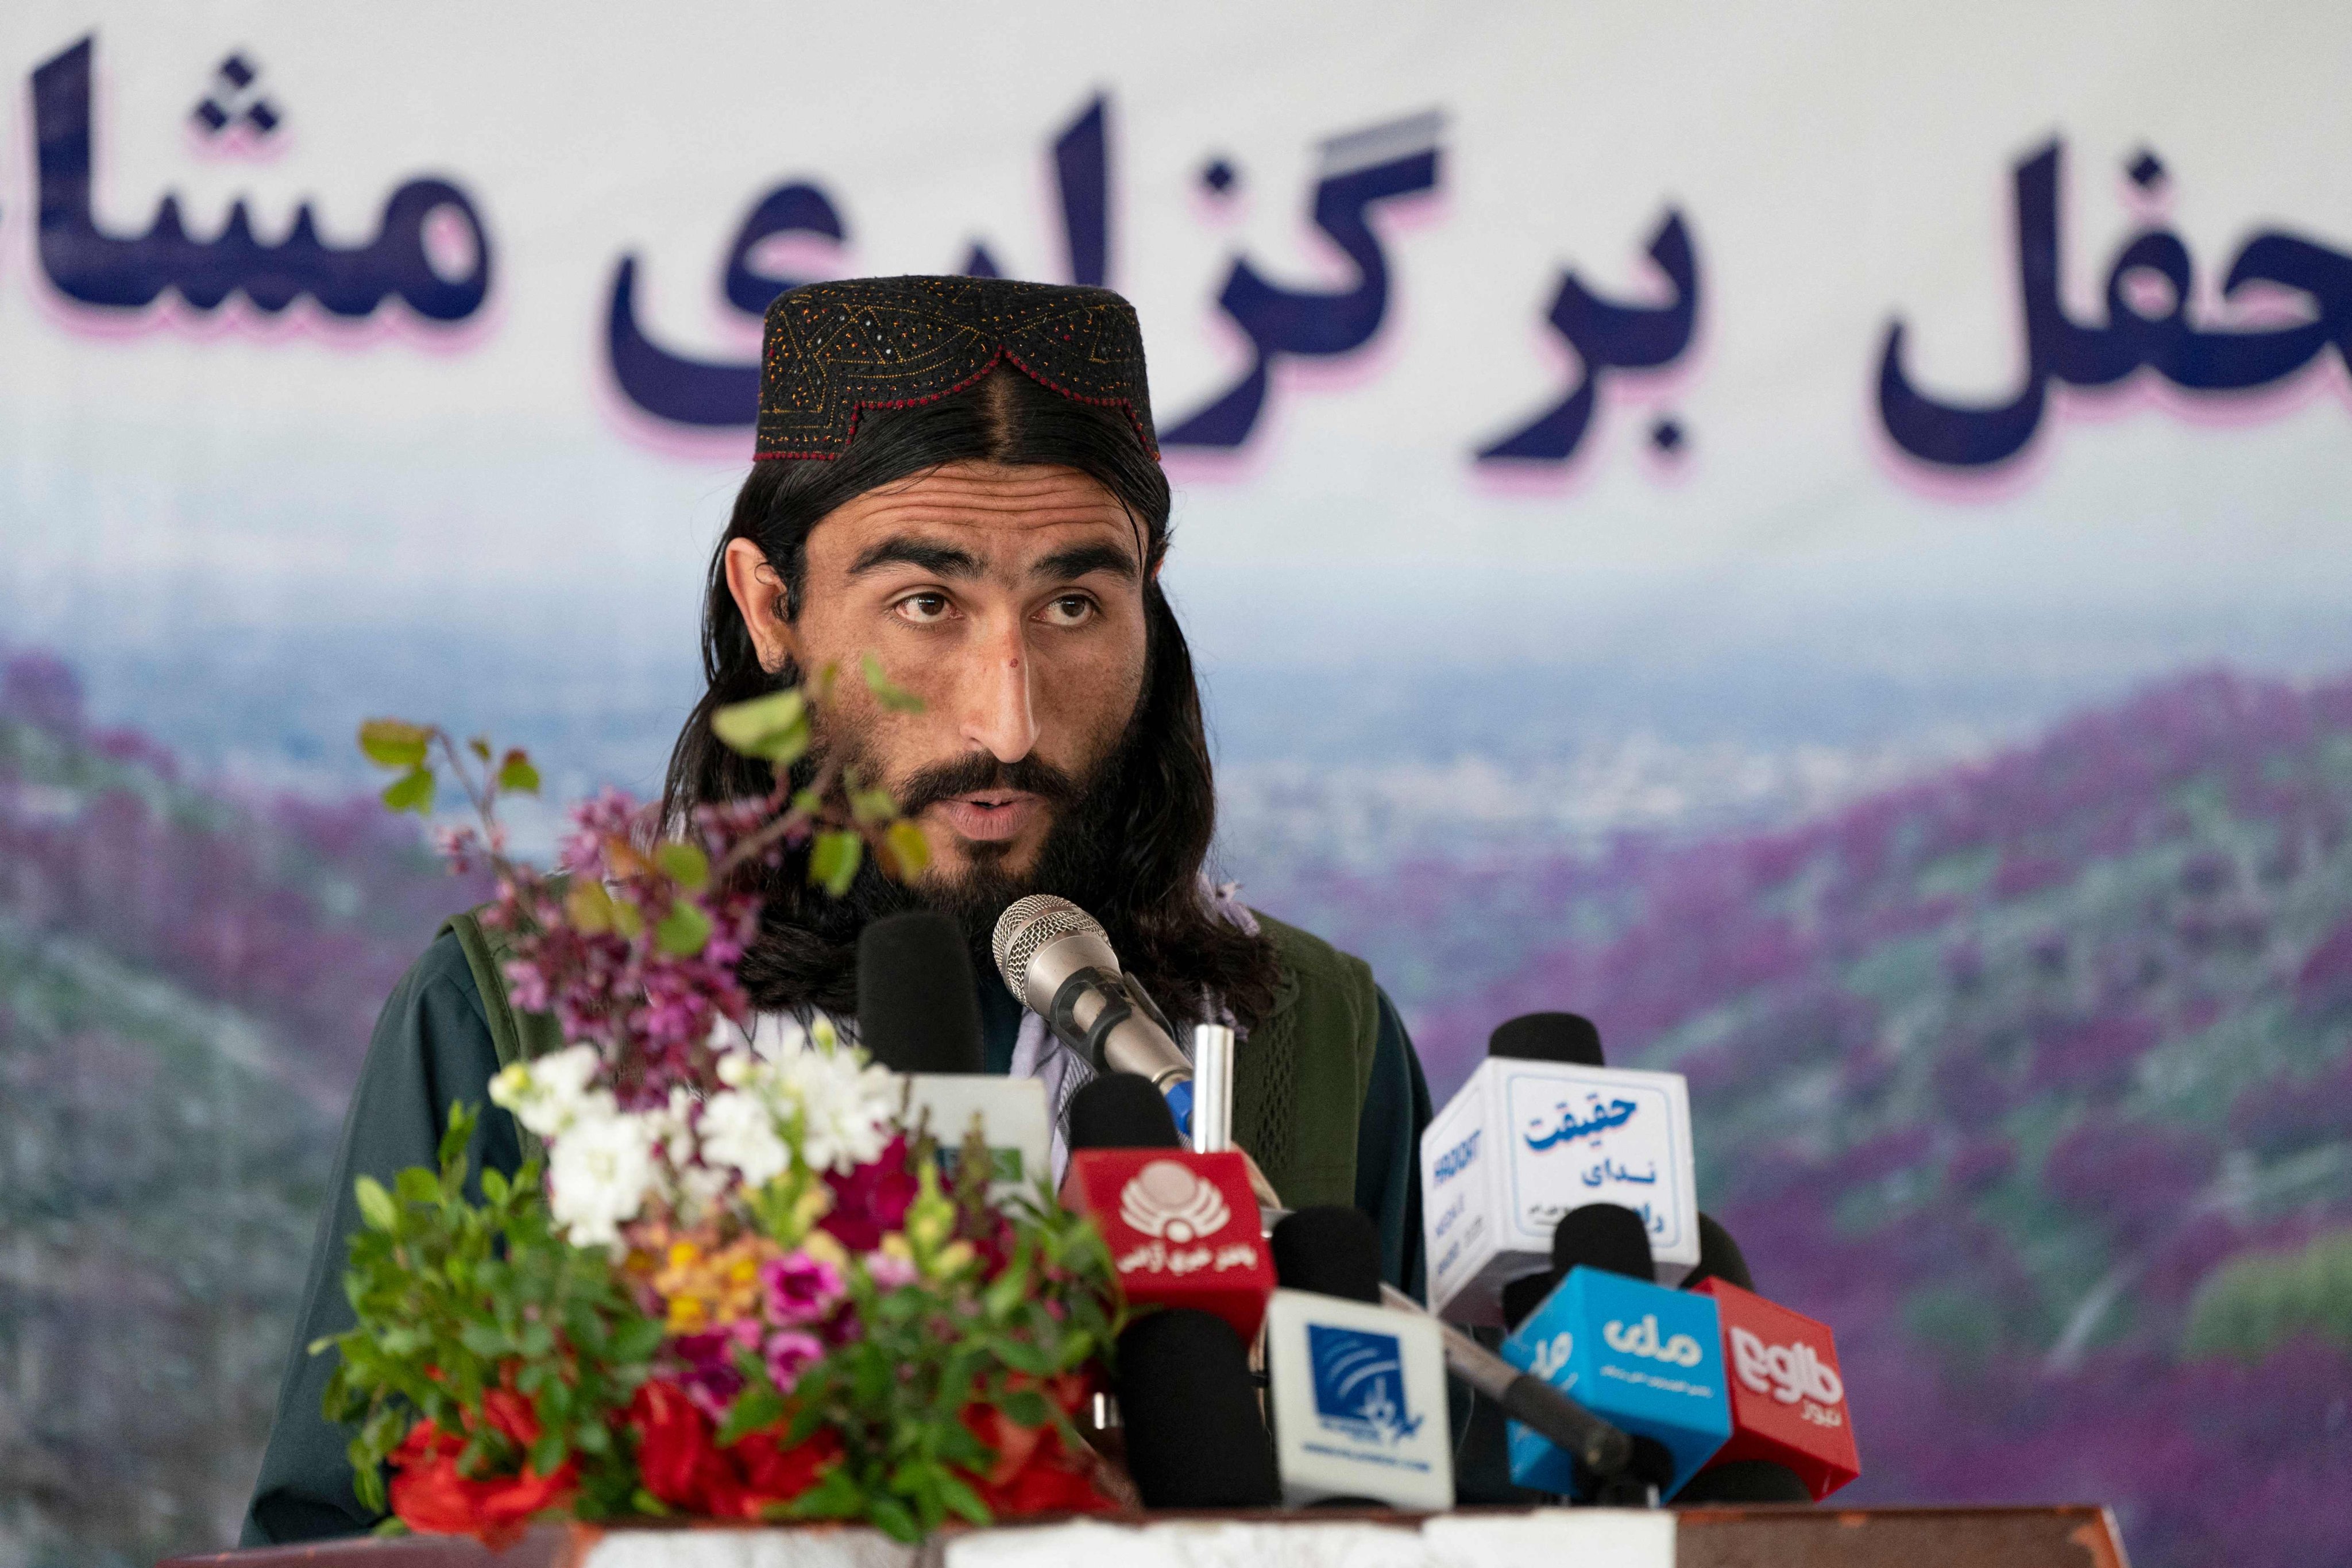 Samiullah Hamas recites poetry at the Purple Flower Poetry Festival, in Charikar district, Parwan Province, Afghanistan. The event featured a male-only line-up reading pro-Taliban verses to a male-only audience. Women poets, like other women, have been silenced. Photo: AFP